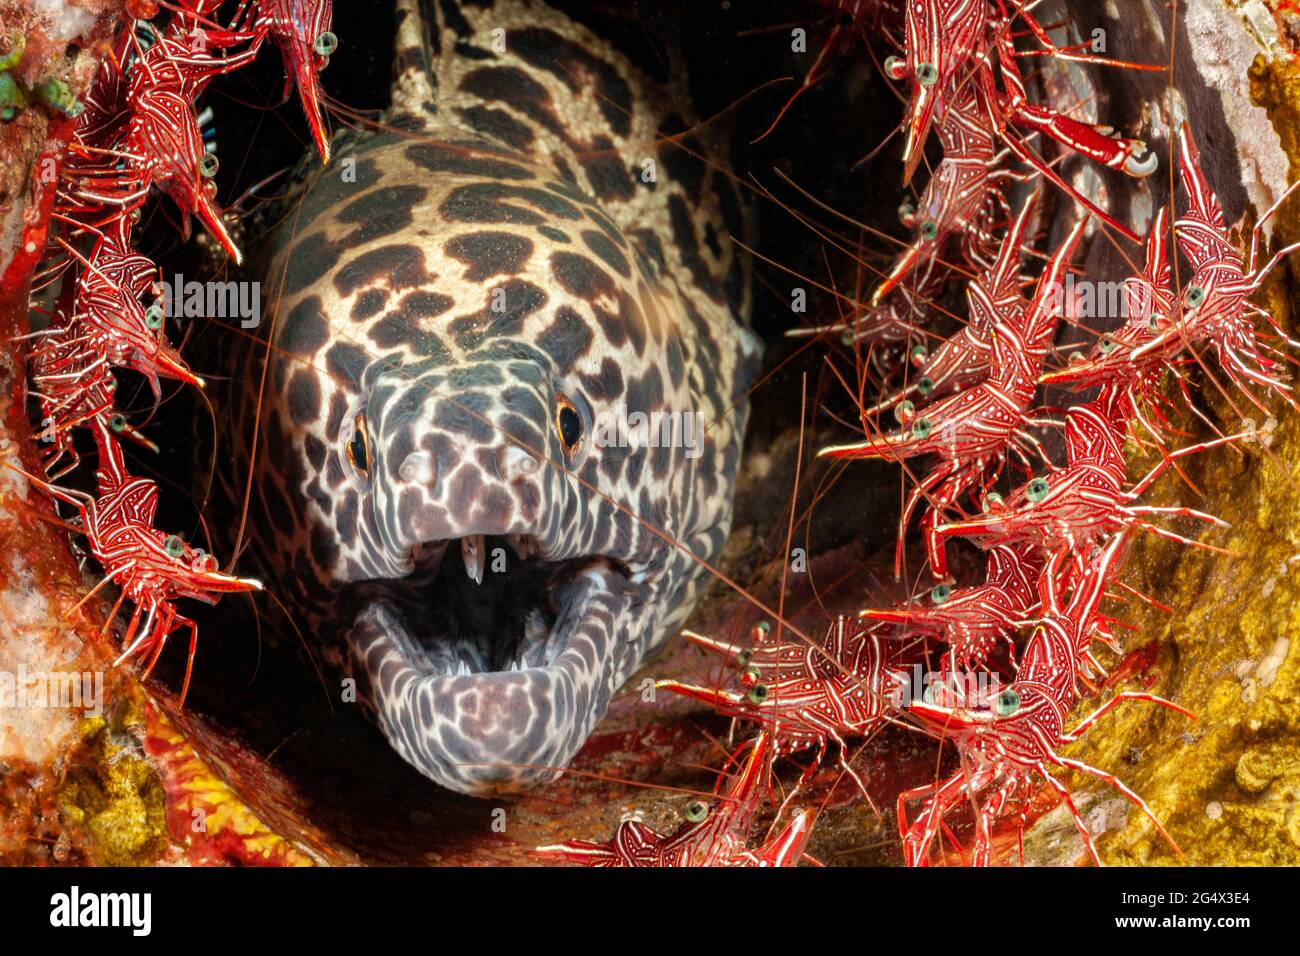 This honeycomb moray eel, Gymnothorax favageneus, is surrounded by male and female dancing shrimp, Rhynchocinetes uritai,  Indonesia. Stock Photo